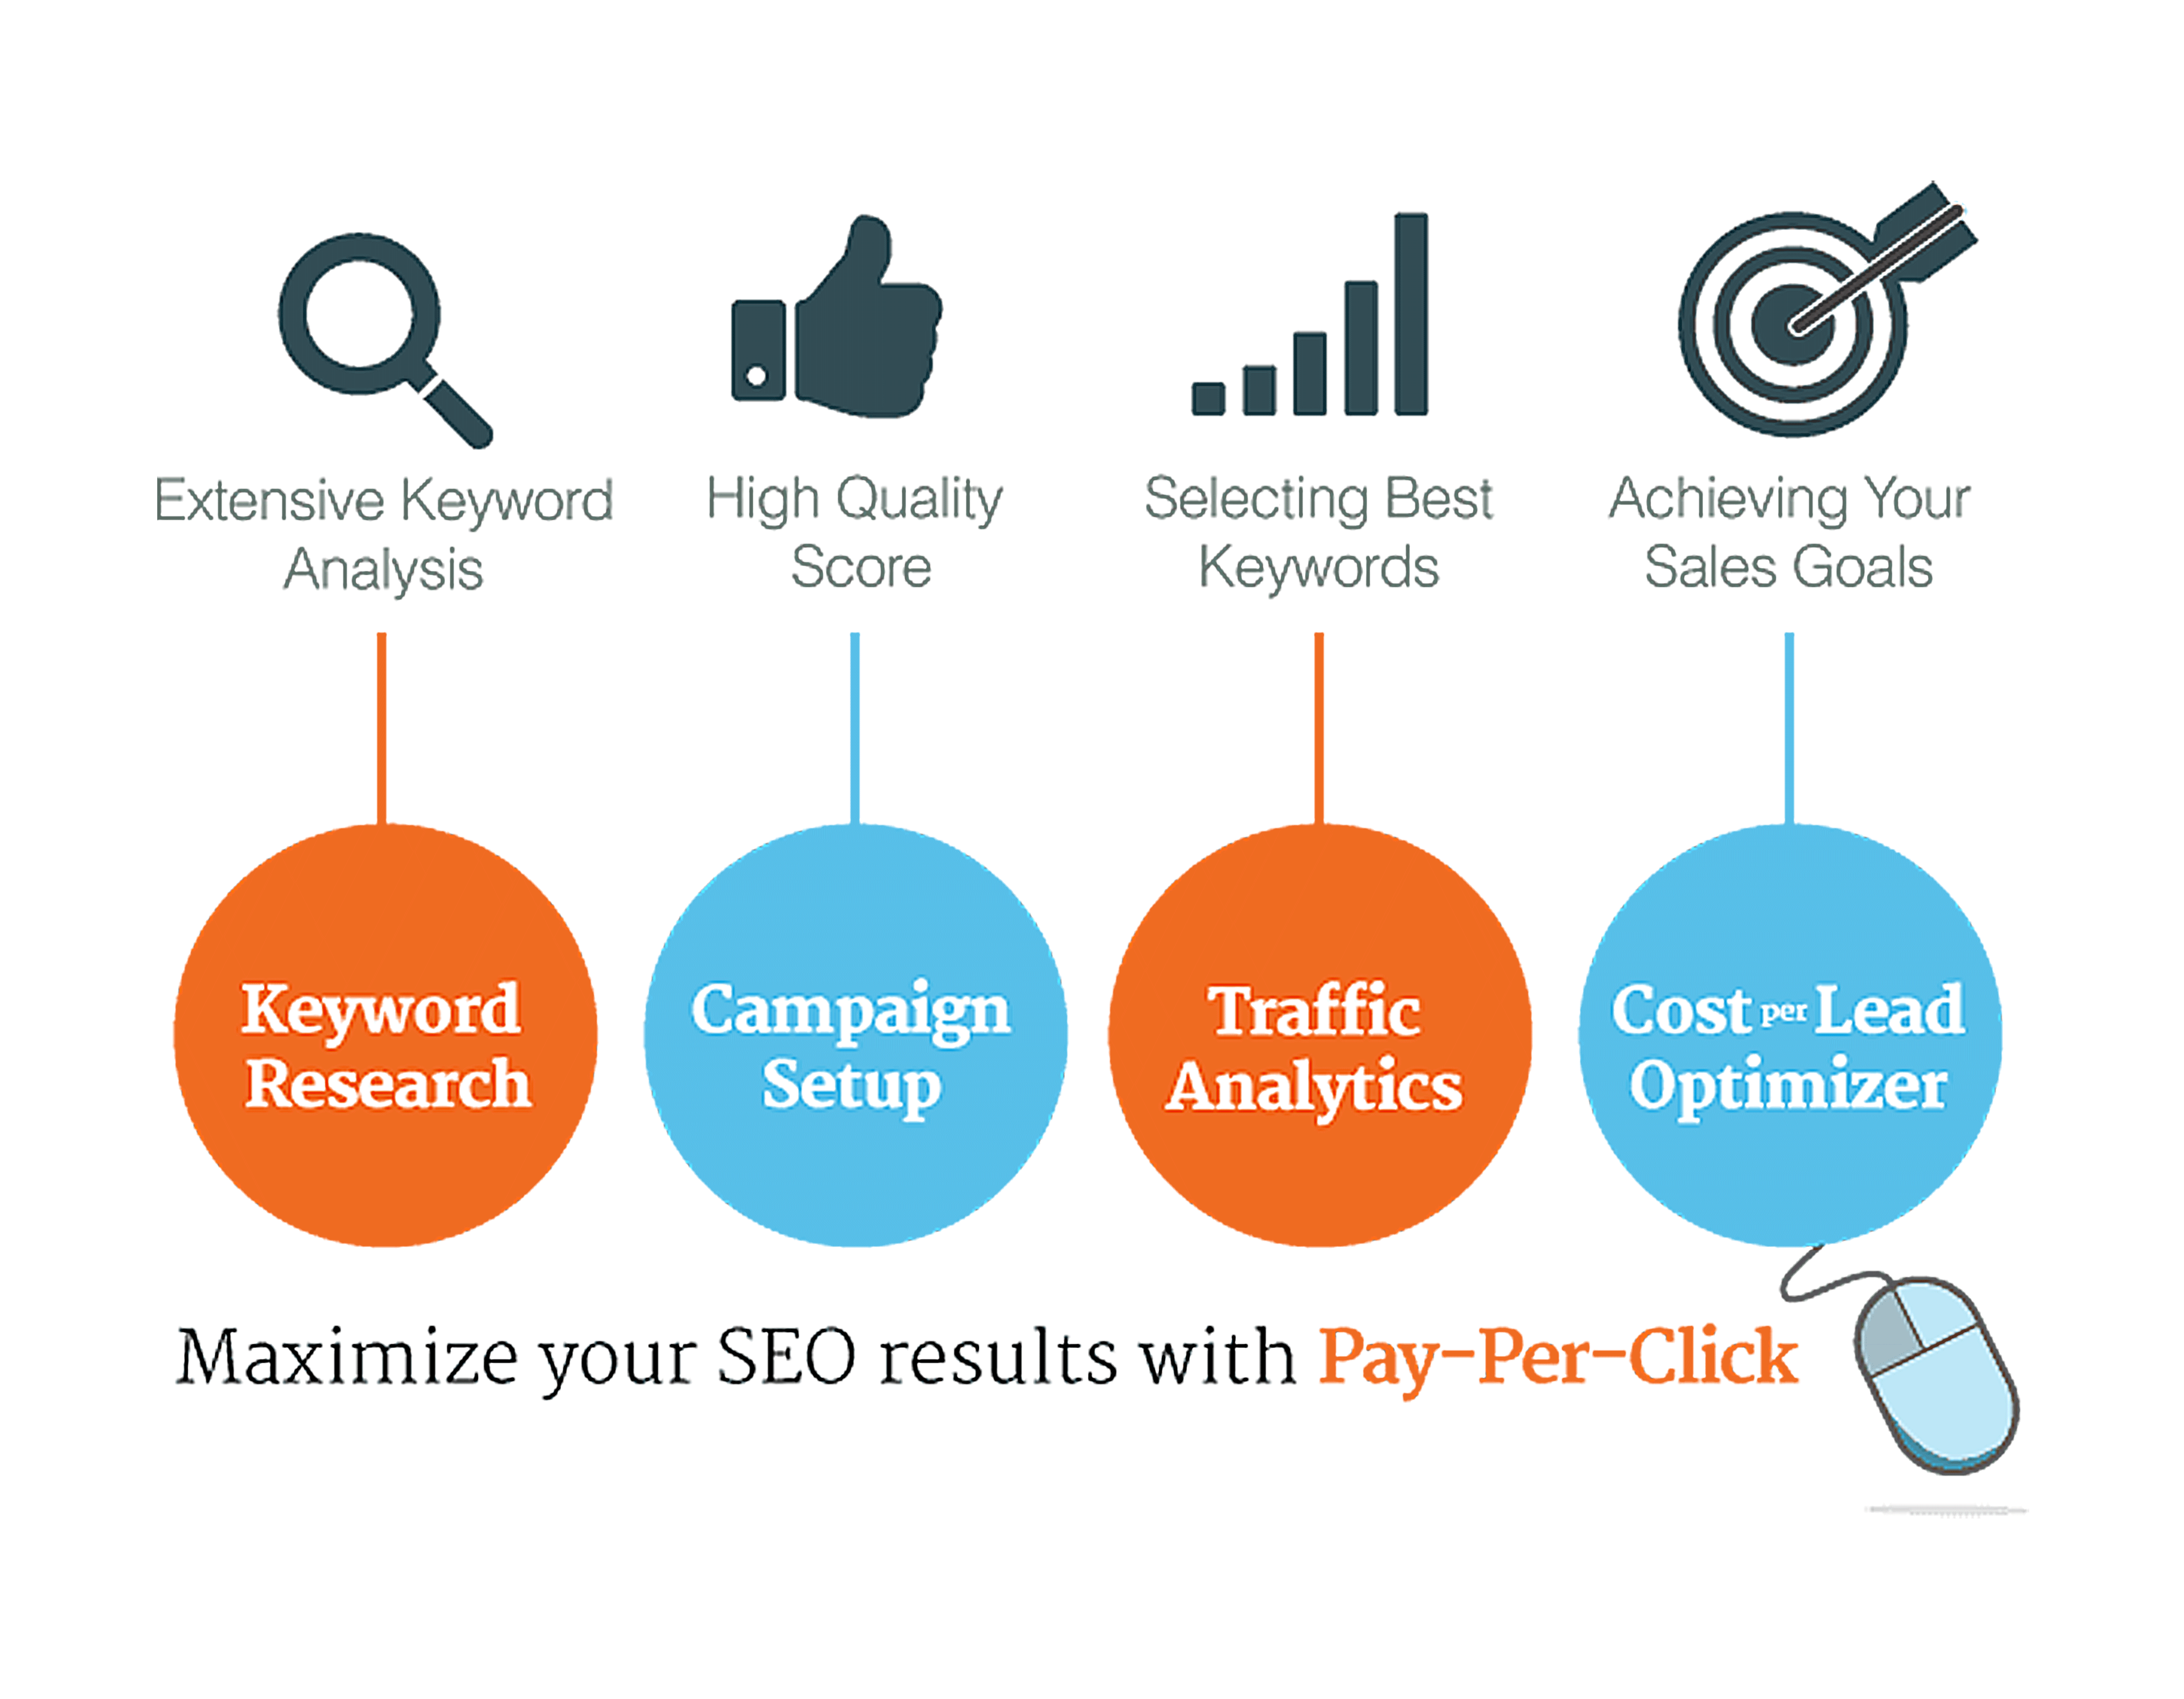 How To Optimize Your PPC Results Using Professional Management Services